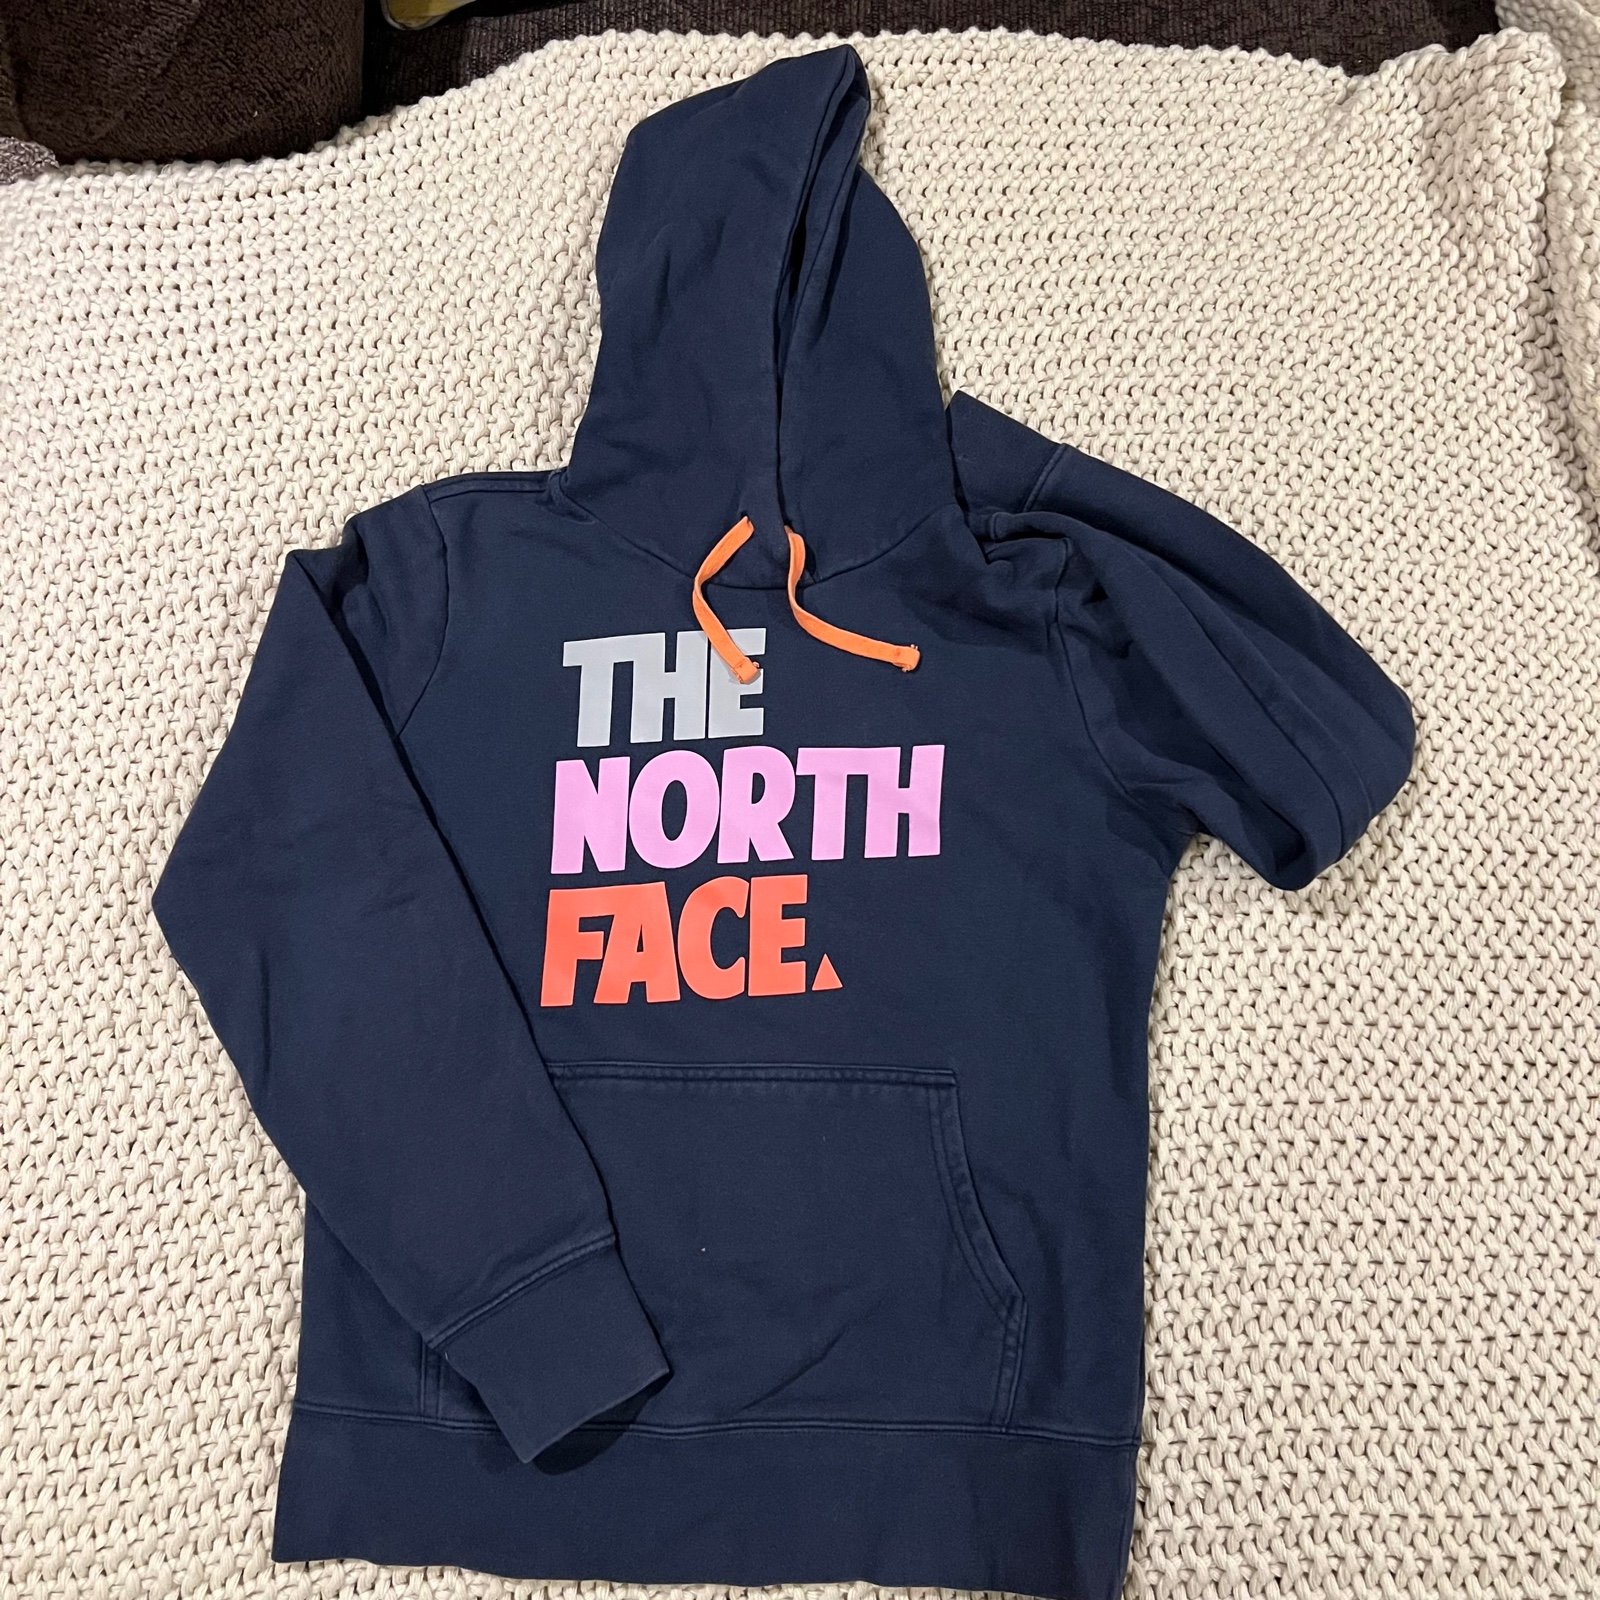 good price The north face hoodie | small je2Iucm4p High Quaity